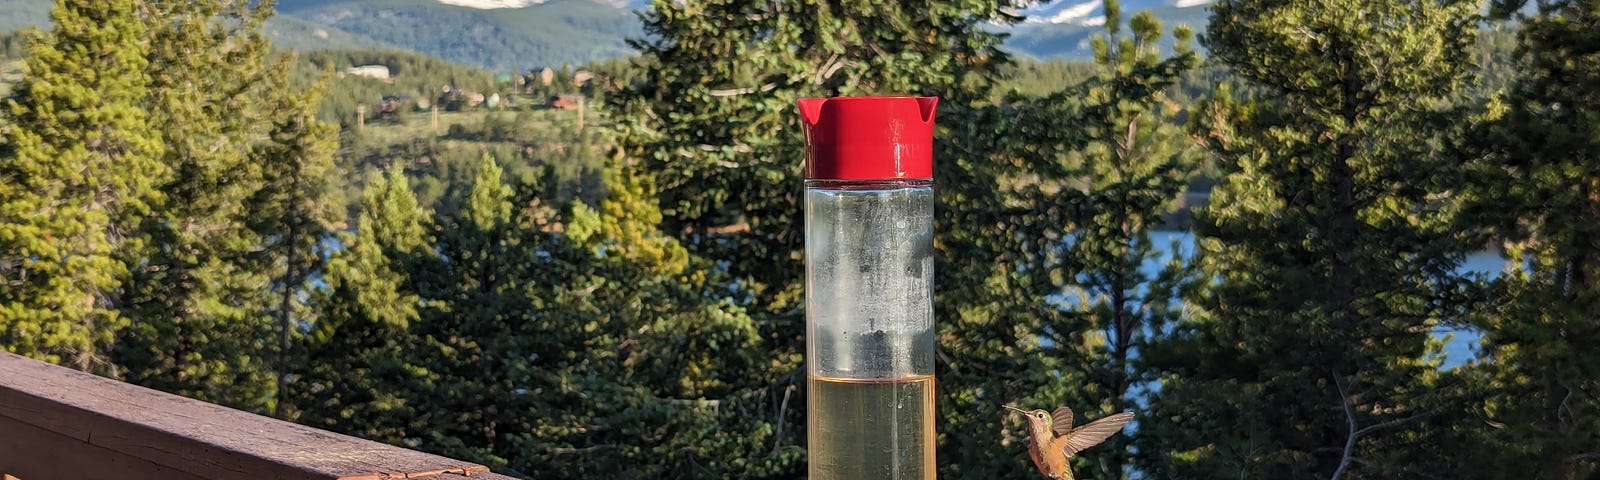 A hummingbird flies towards a feeder and another one with emerald feather is feeding. The feeder is sitting on a wooden rail. Trees and mountains are in the background.